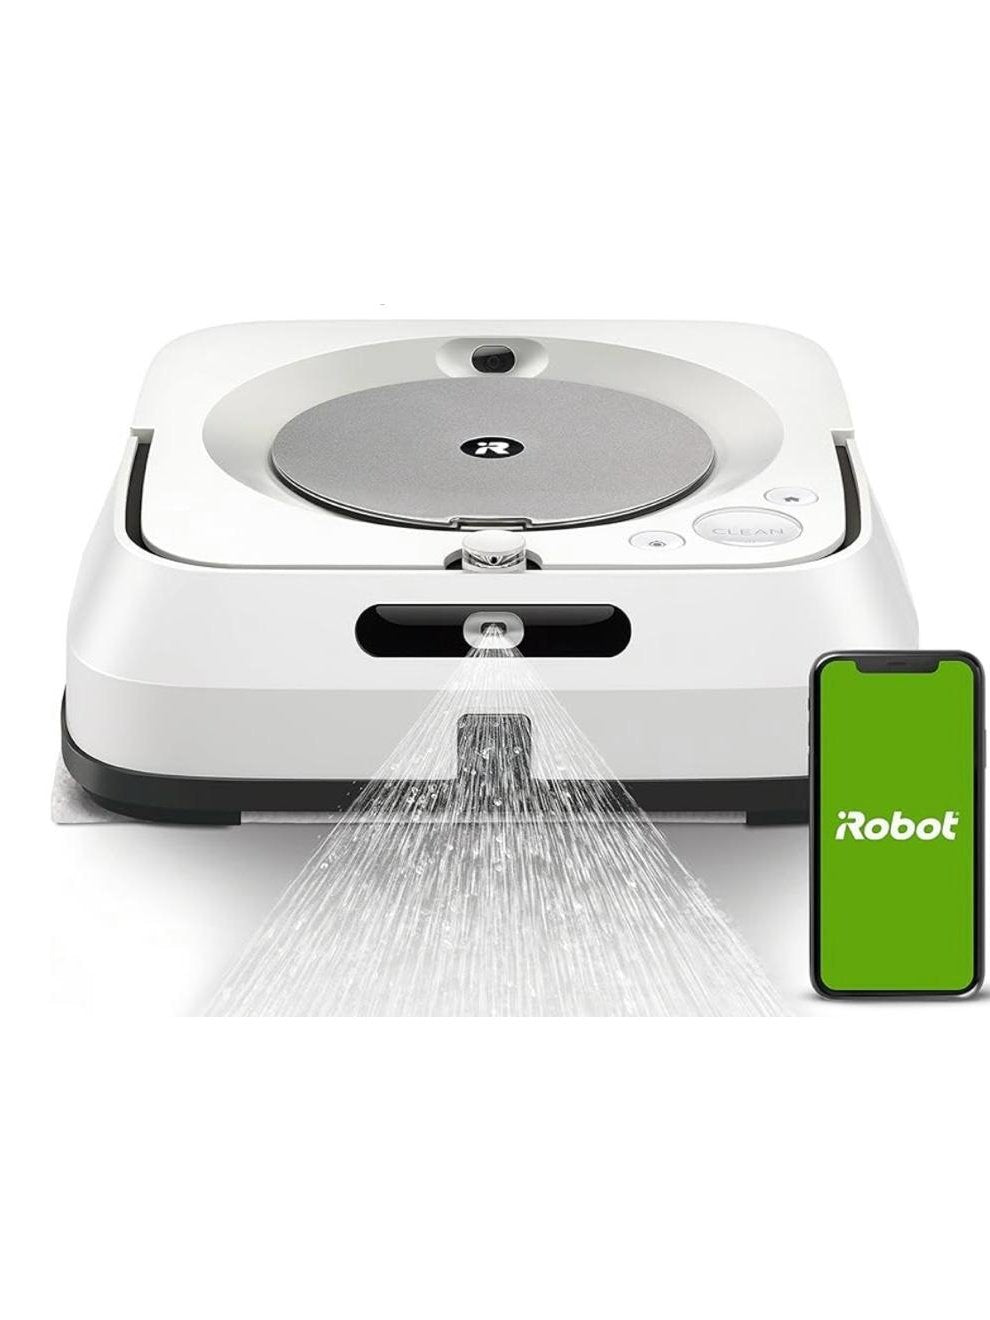 iRobot Braava Jet M6 (6110) Ultimate Robot Mop- Wi-Fi Connected, Precision Jet Spray, Smart Mapping, Works with Alexa, Ideal for Multiple Rooms, Recharges and Resumes, White, Braava M6